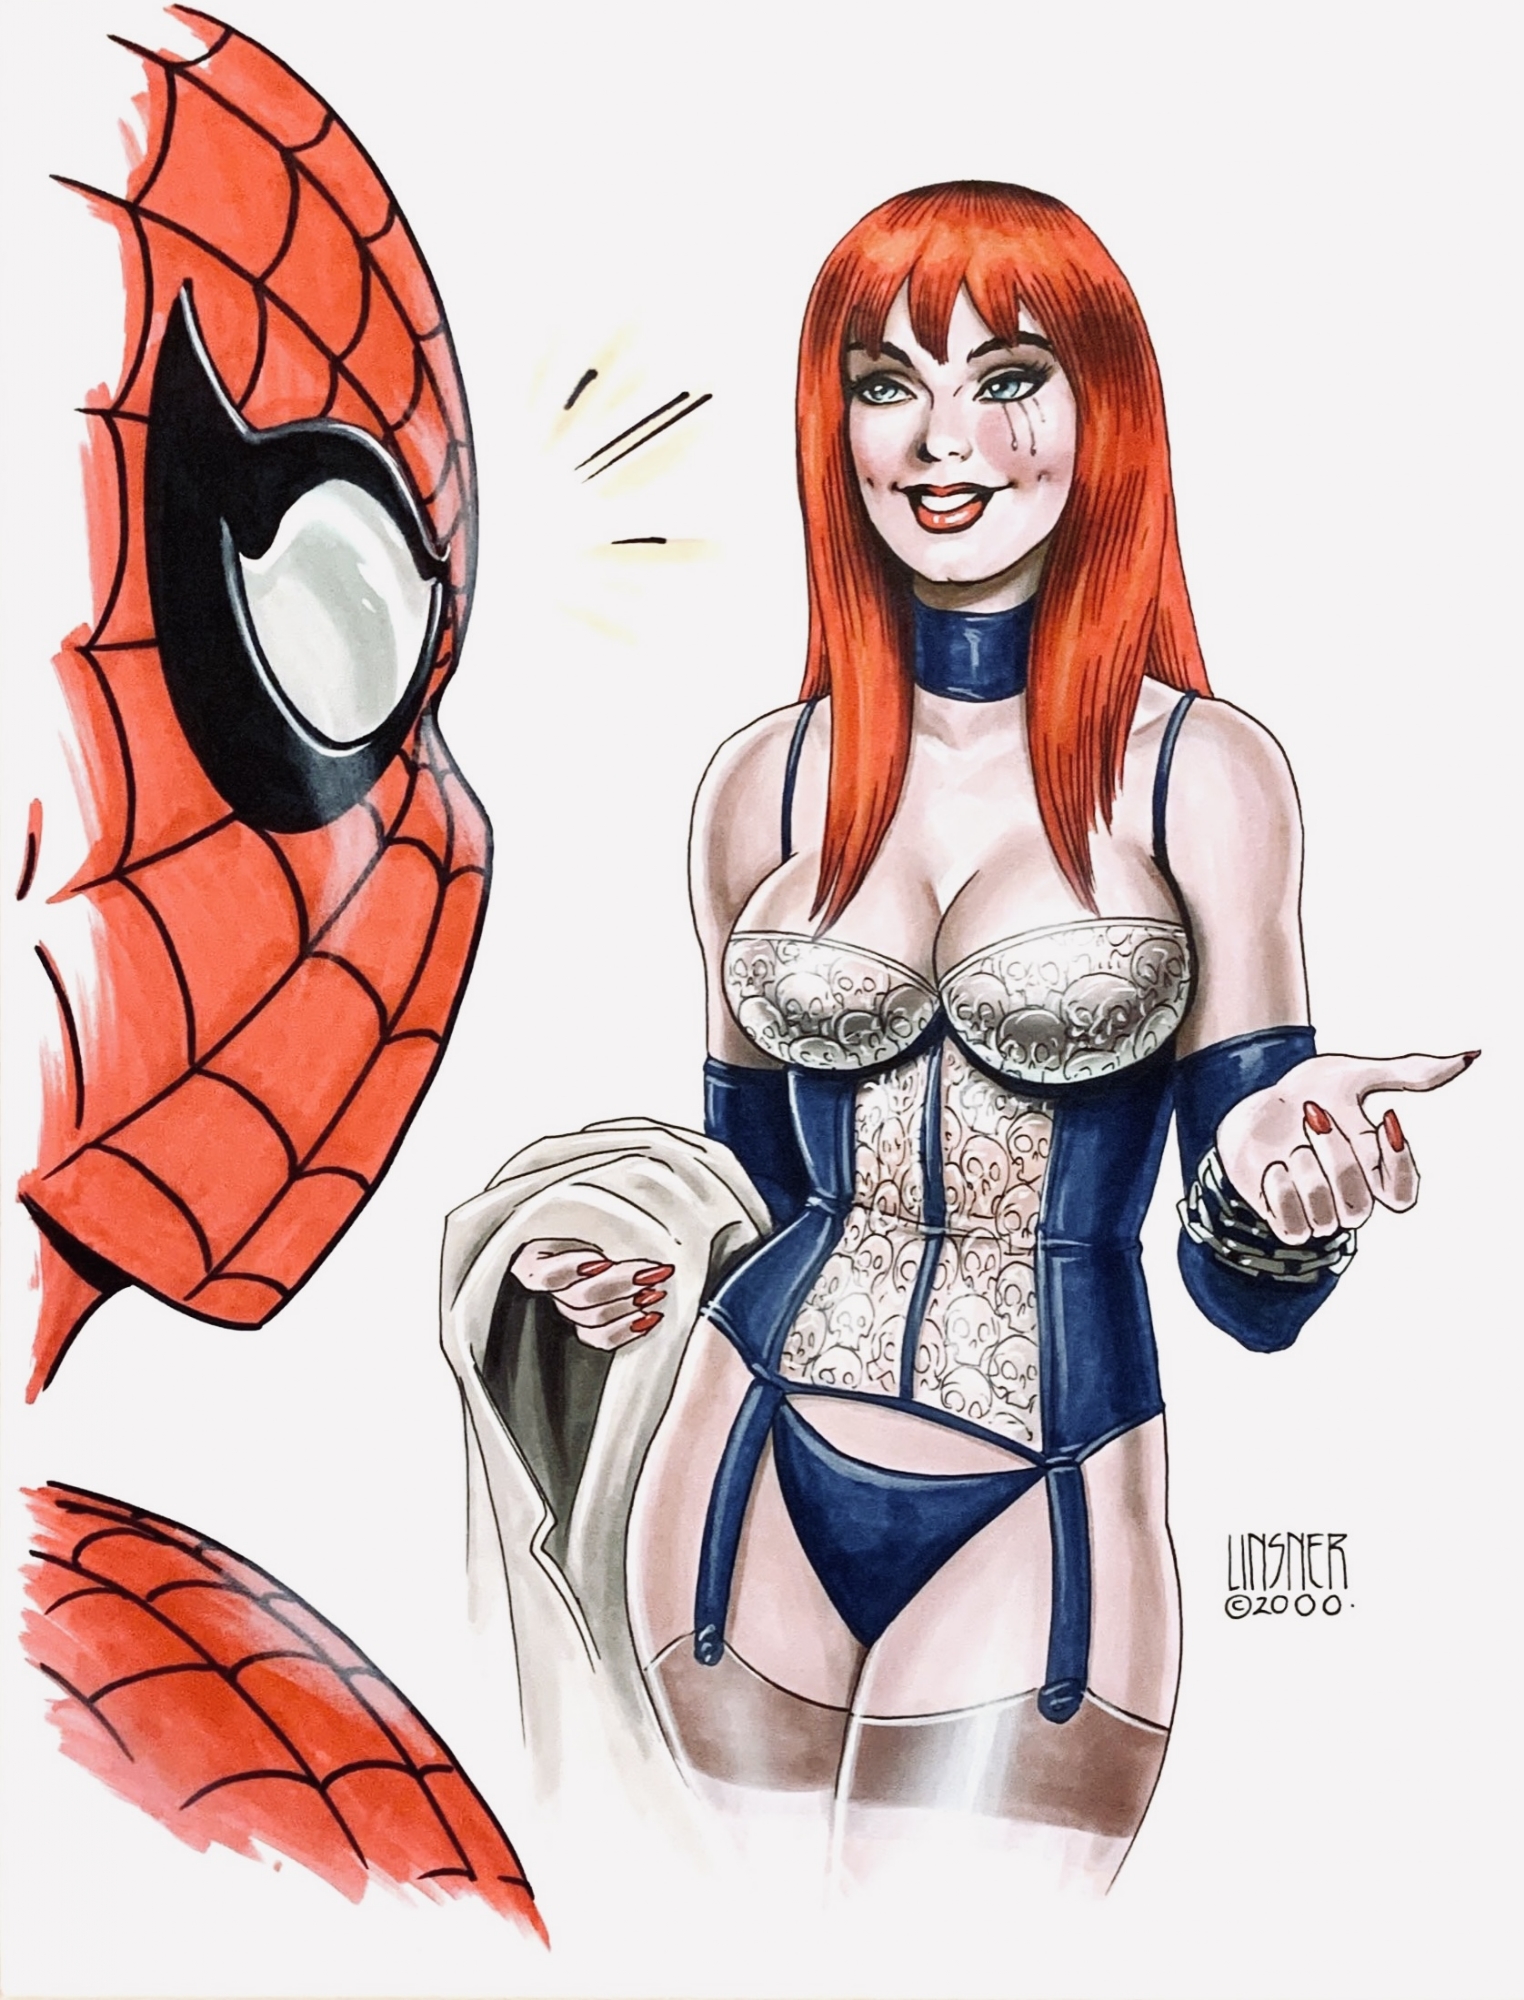 Mary Jean Hd Sex - Wizard Magazine 120 Page 38 Mary Jane From Spider-Man Painting (2001), in  Michael Reyes's Spider-Man / Venom Comic Art Gallery Room